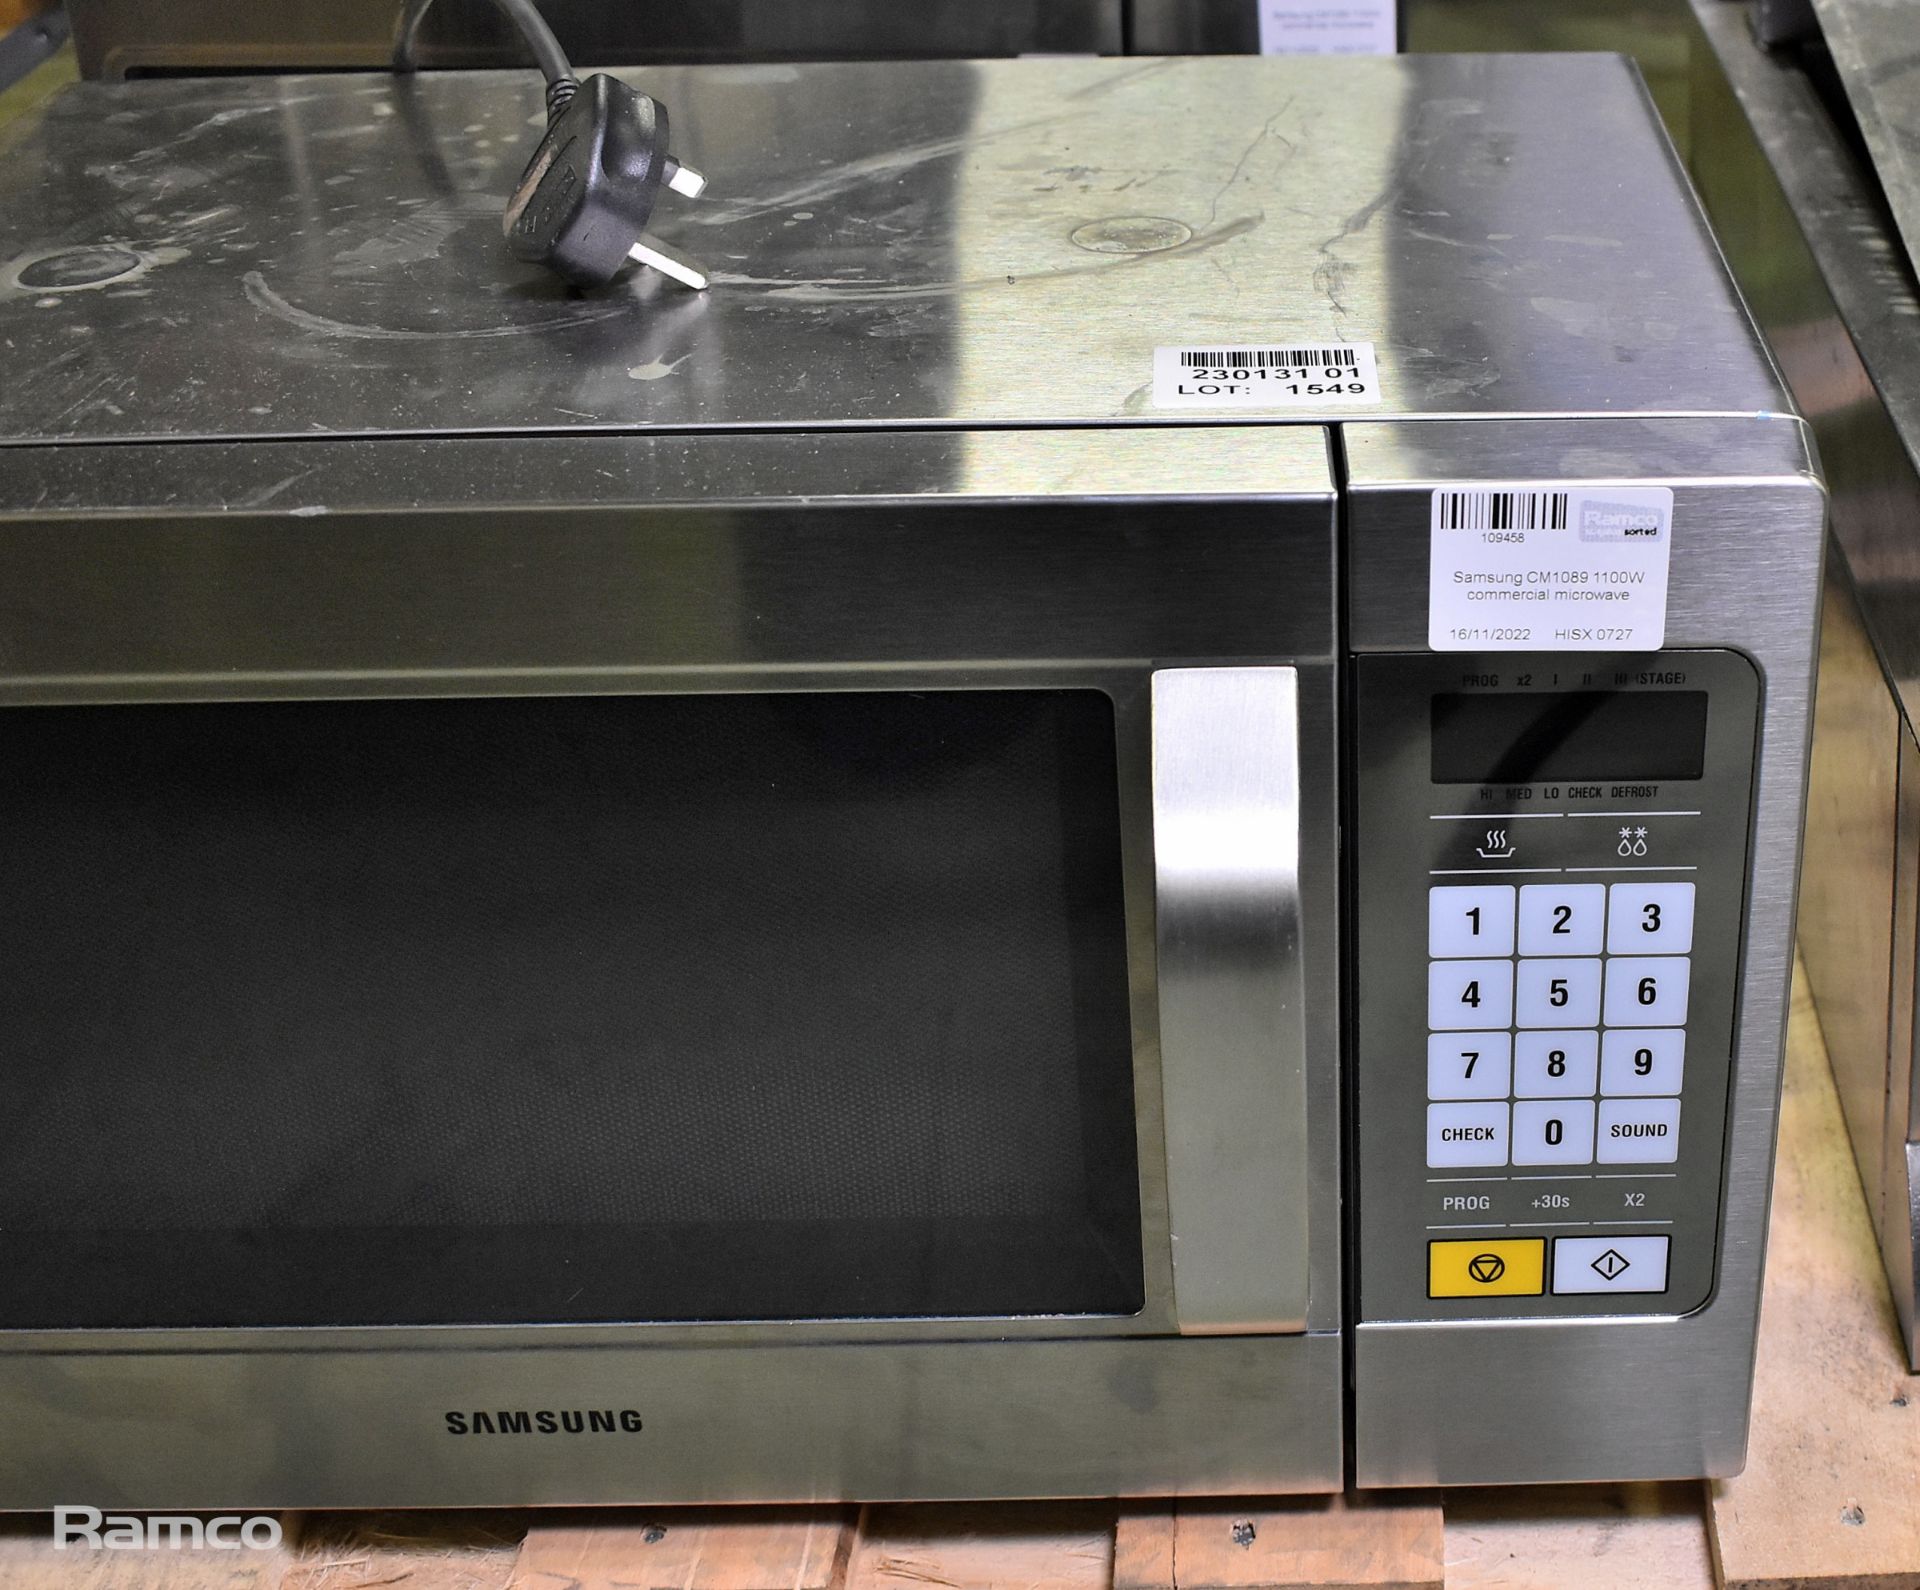 Samsung CM1089 1100W commercial microwave - Image 3 of 4